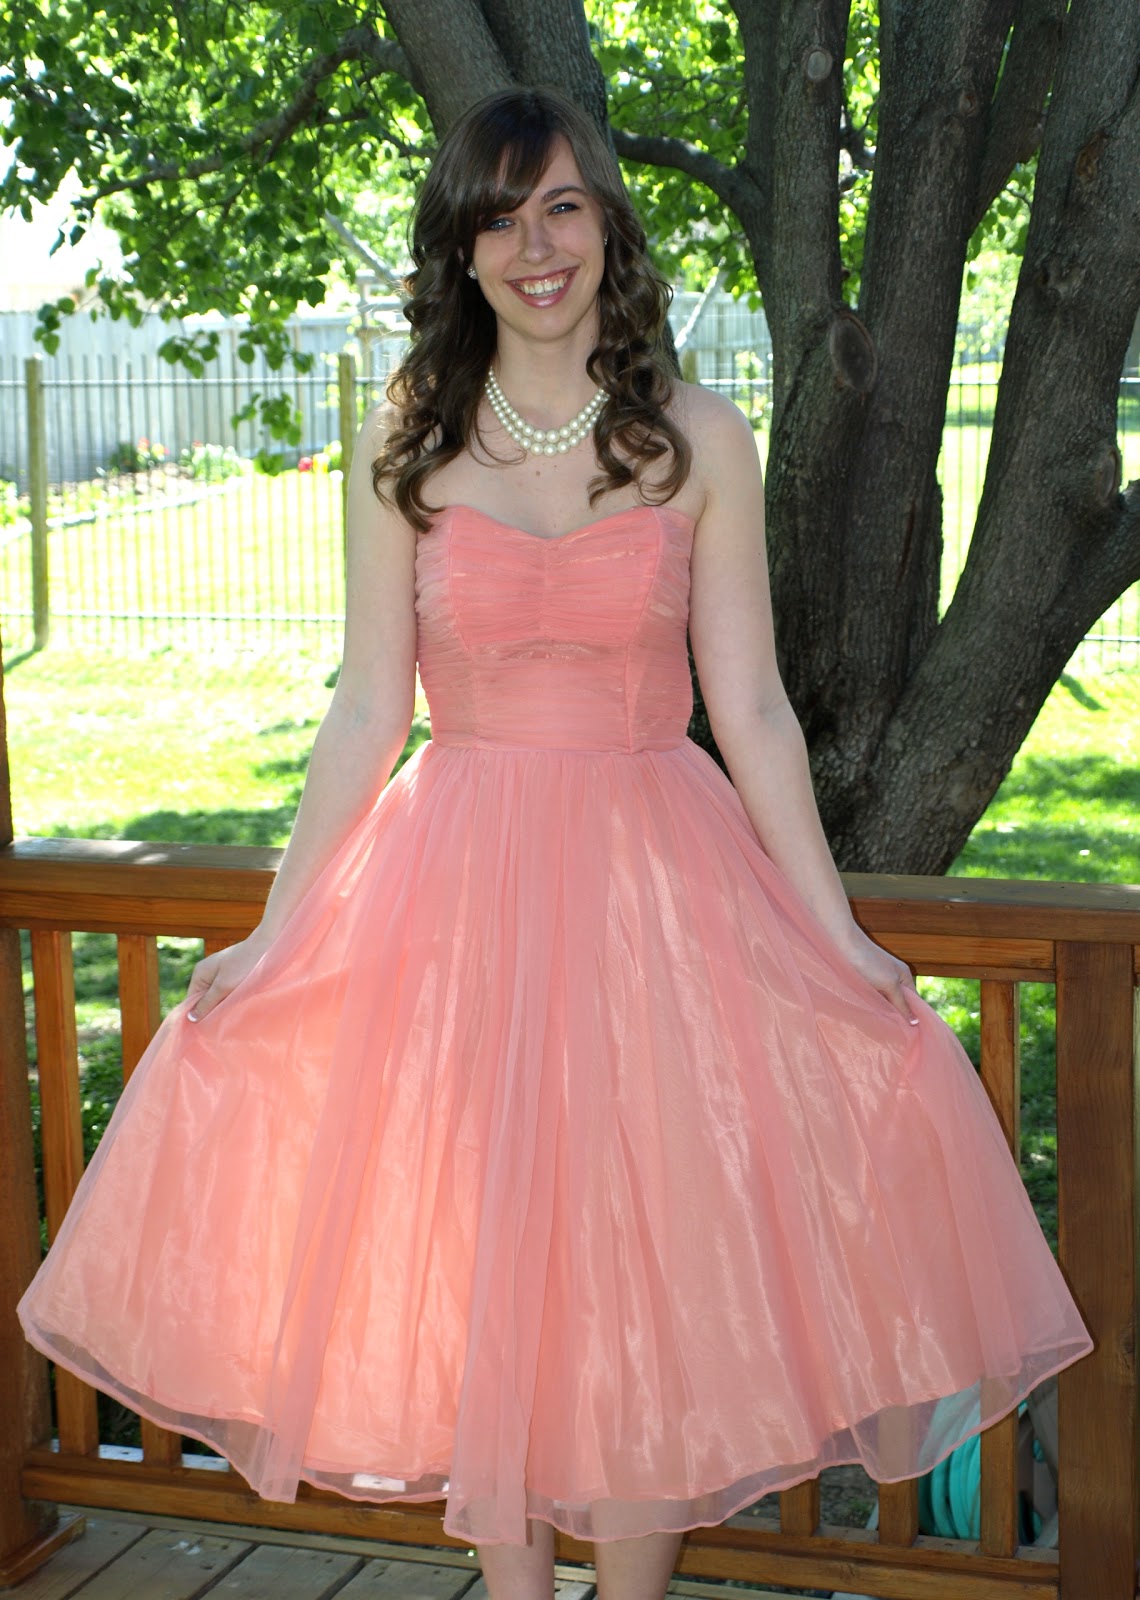 That's my Cat: My Vintage Prom Daughter!